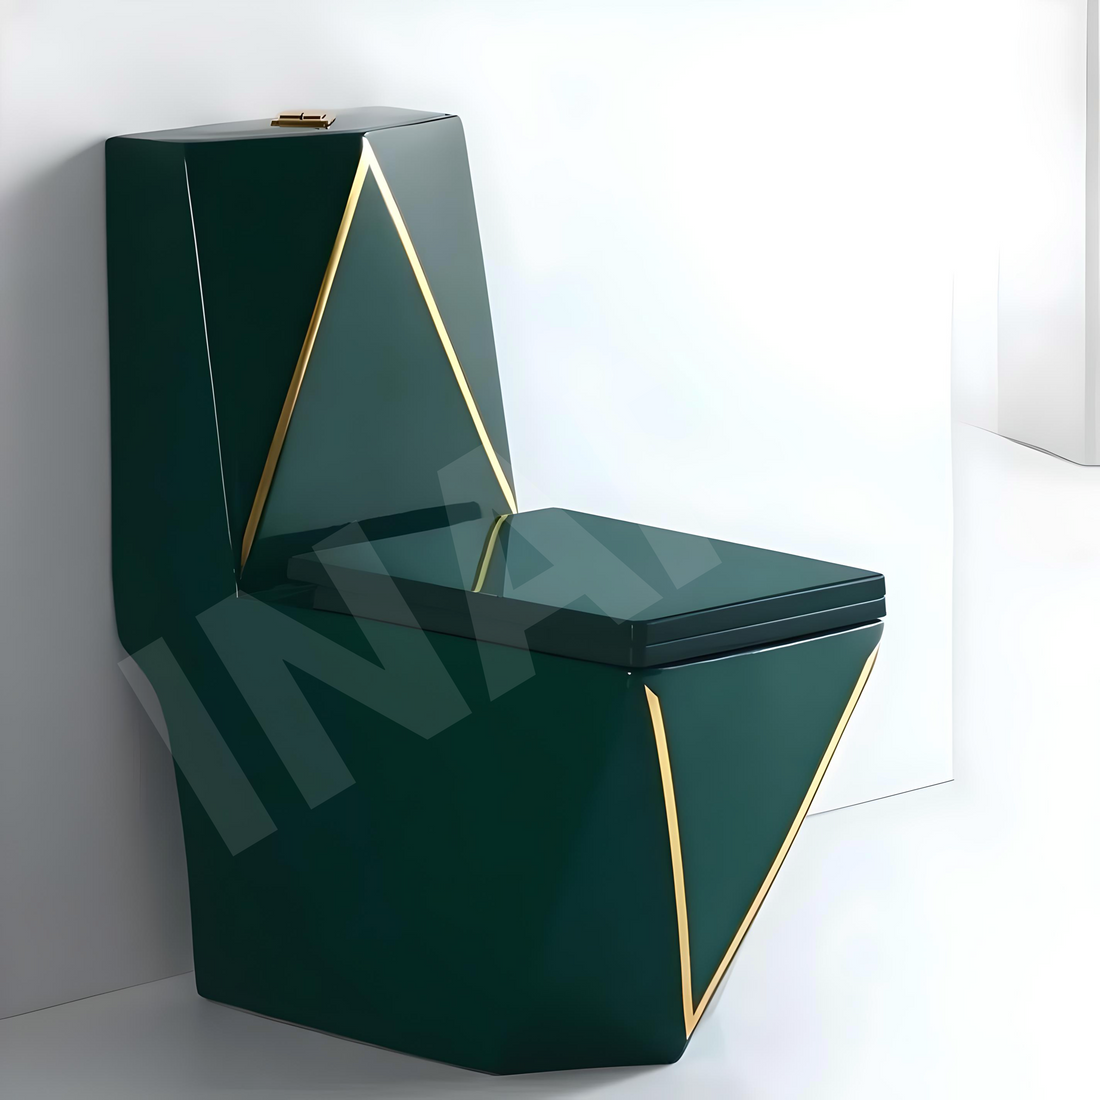 InArt Green Ceramic European Water Closet | Floor Mounted Western Toilet Commode EWC S Trap | 68x36x83 cm | One Piece with Soft Close Hydraulic Seat and Flush Tank - InArt-Studio